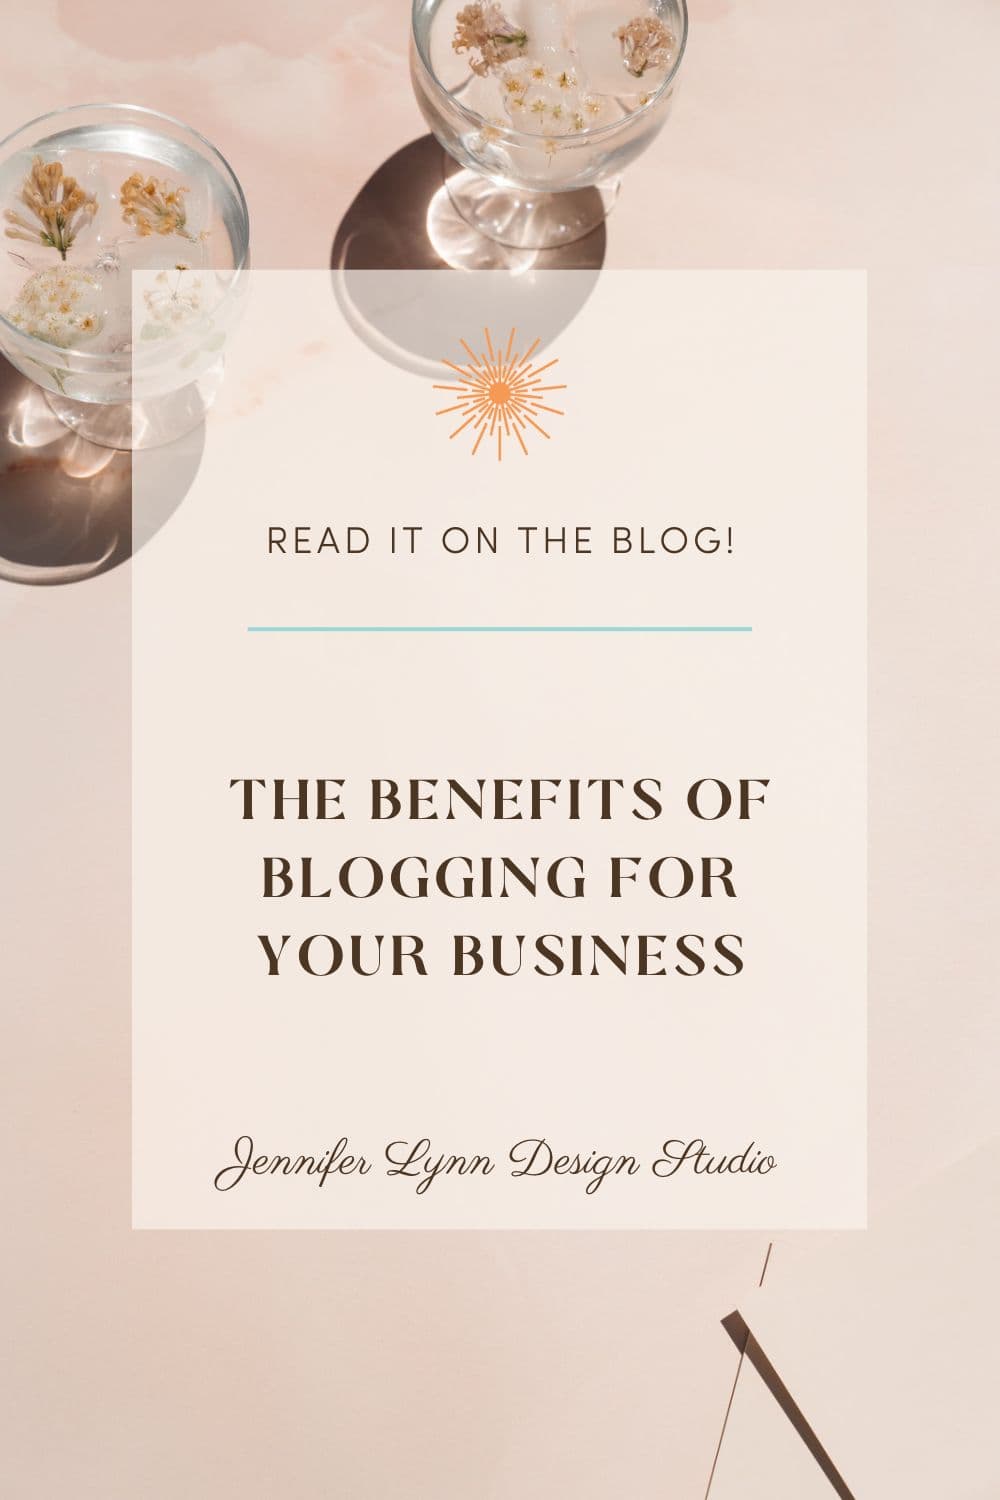 The Benefits of Blogging for Your Business by Jennifer Lynn Design Studio